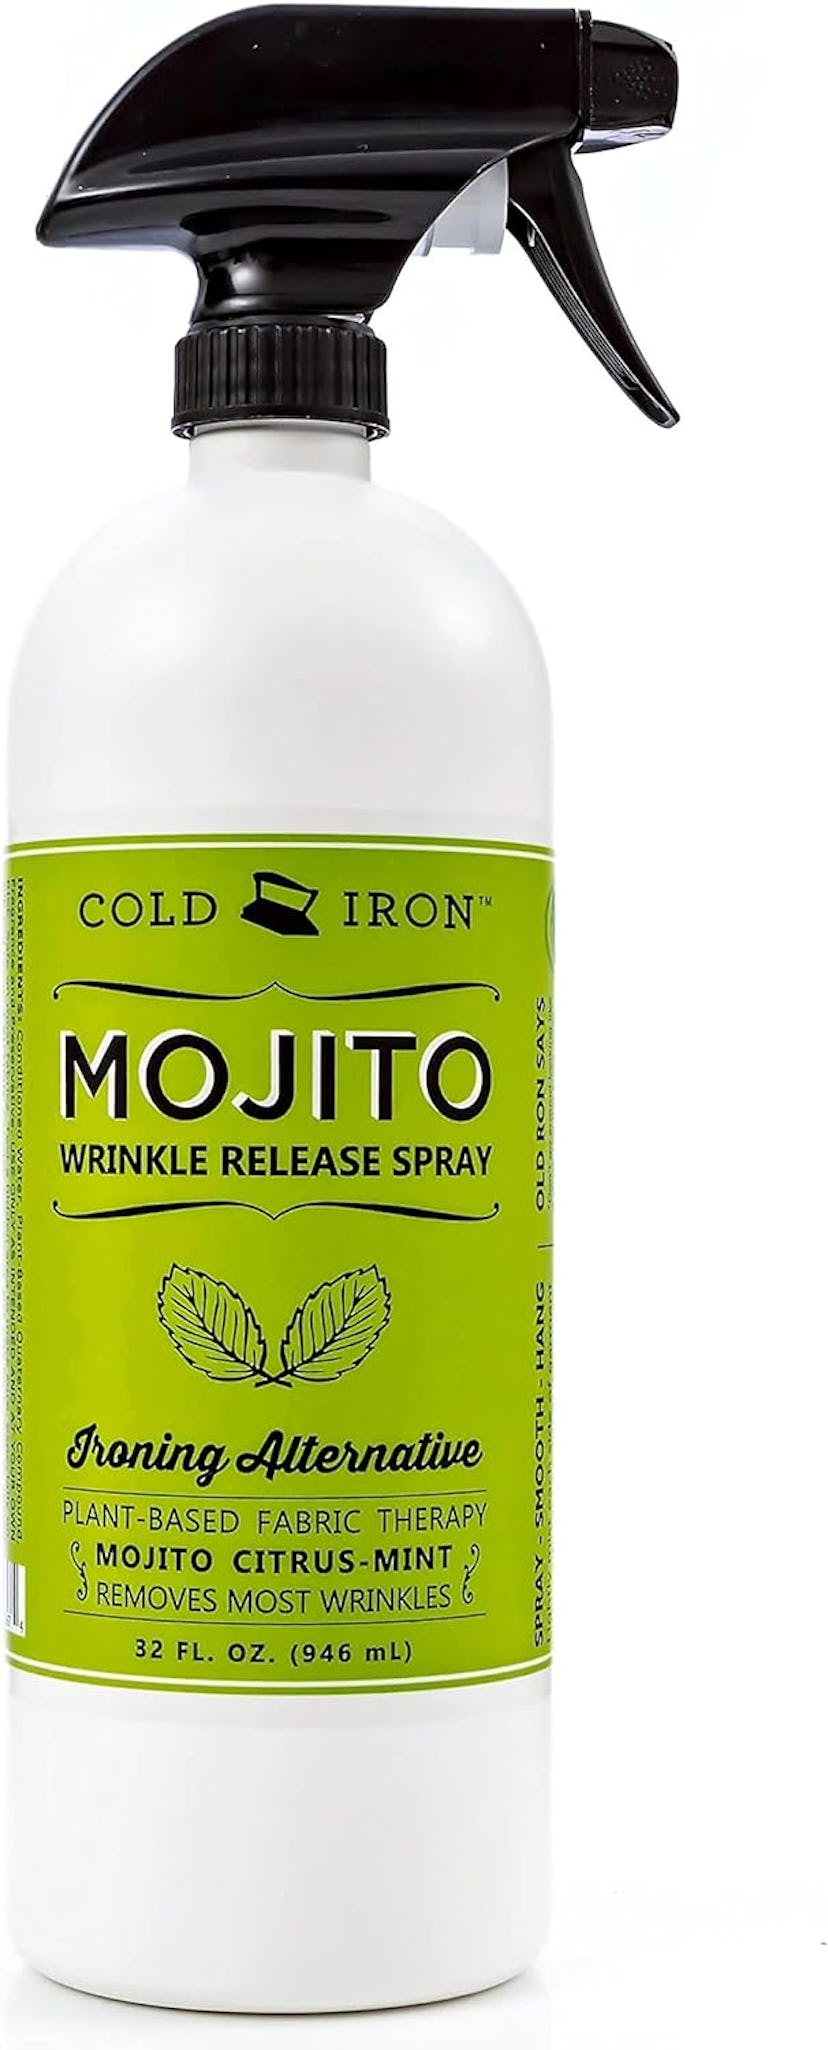 Cold Iron Clothing Wrinkle Release Spray